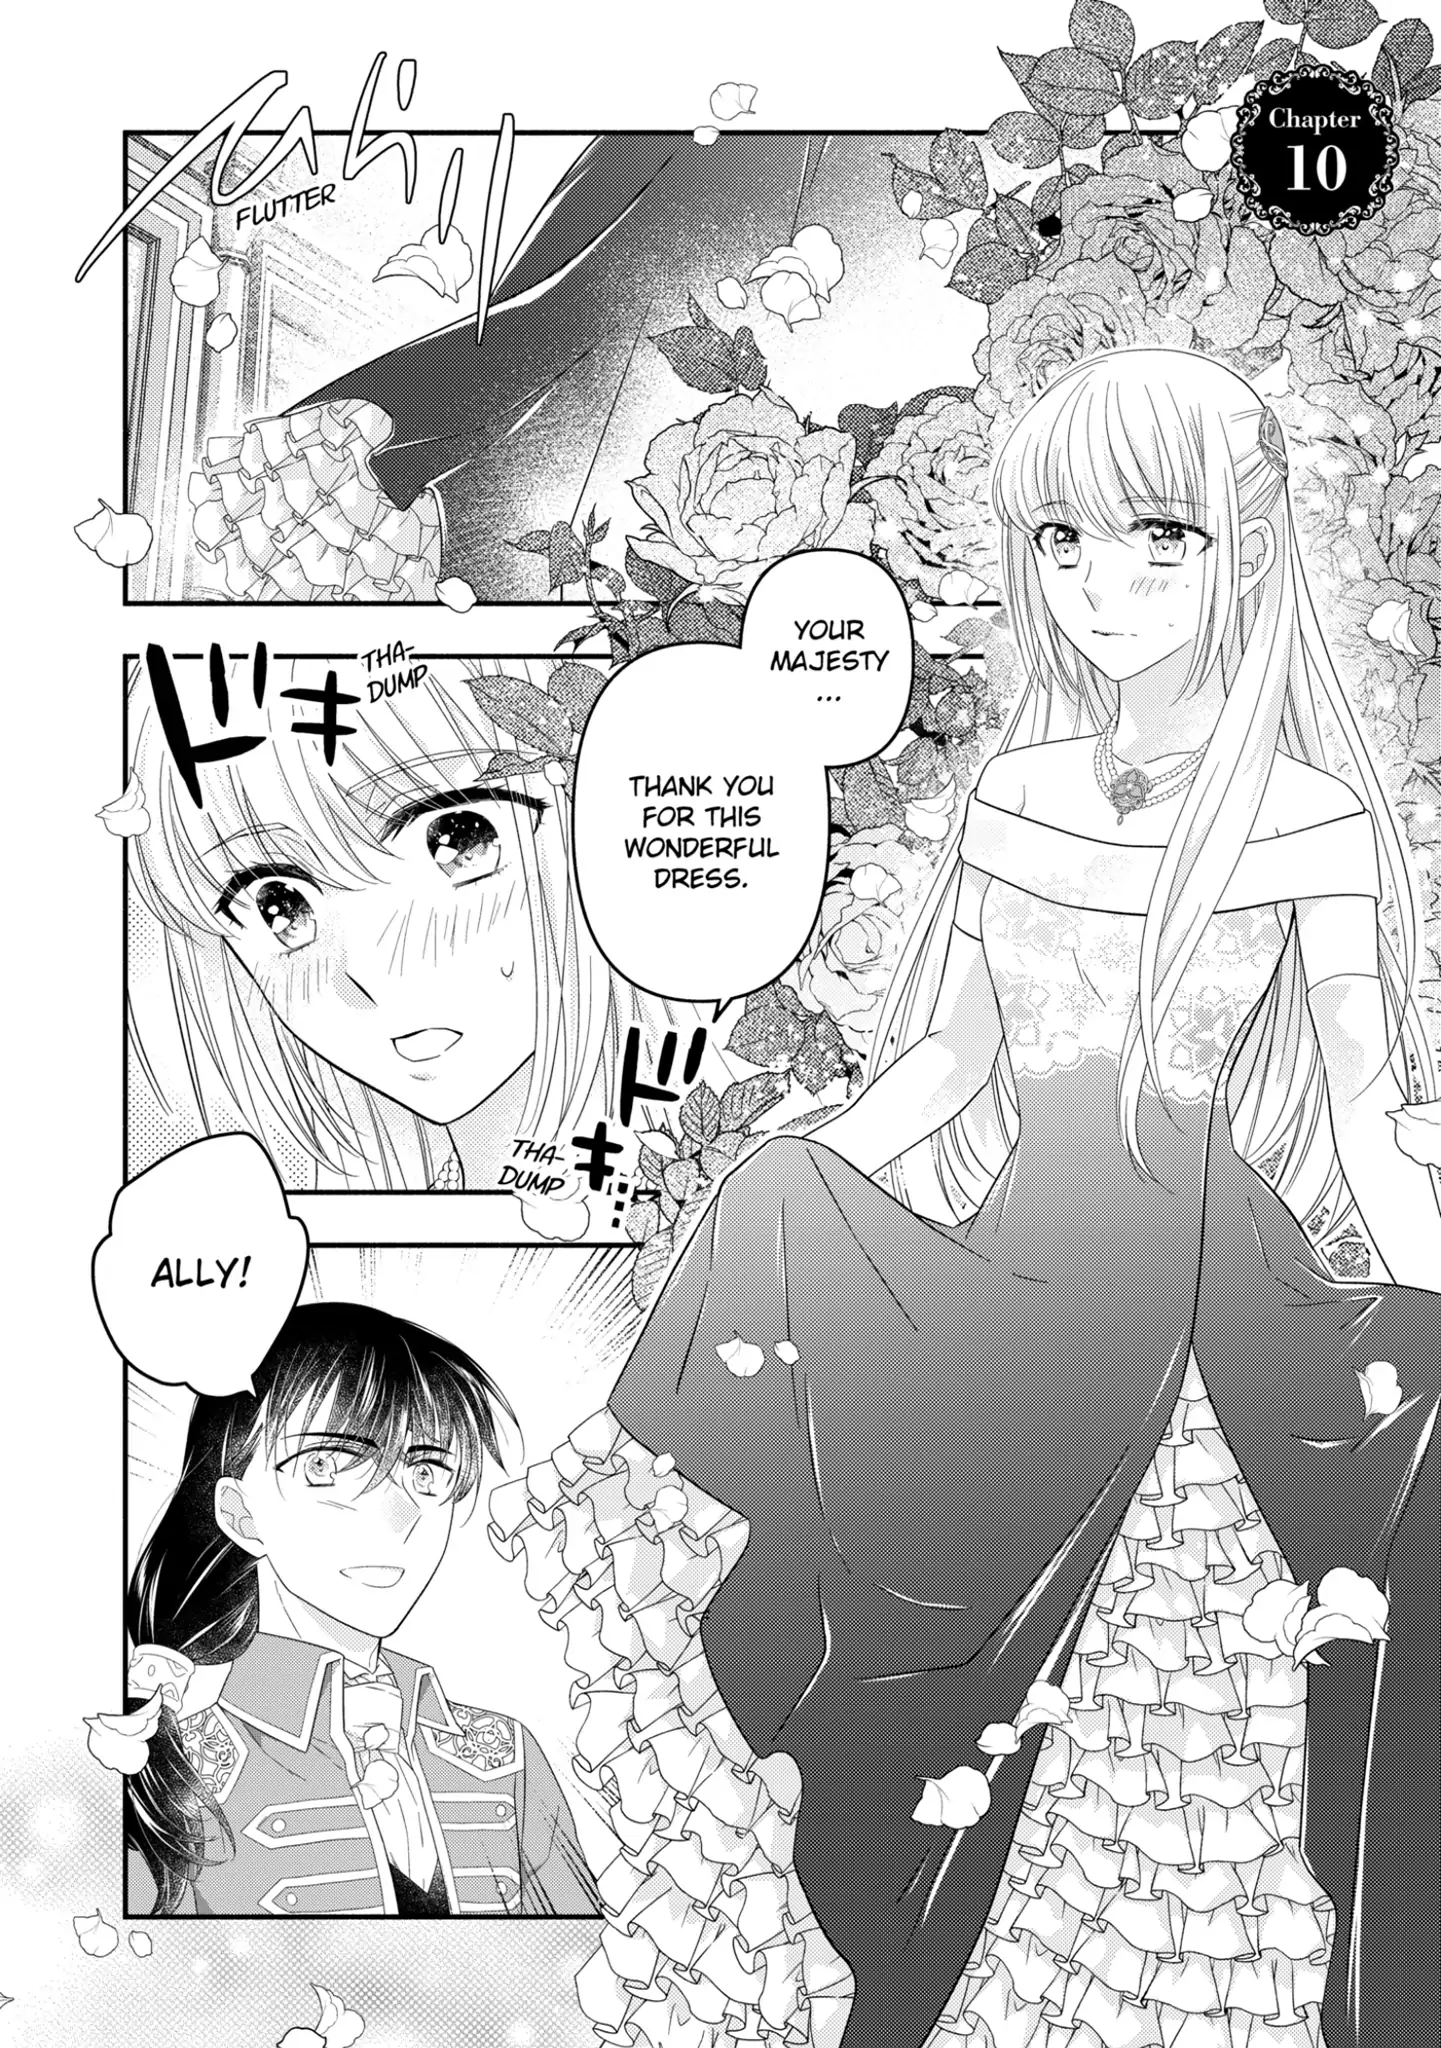 The Princess Of Blue Roses - chapter 10.1 - #1